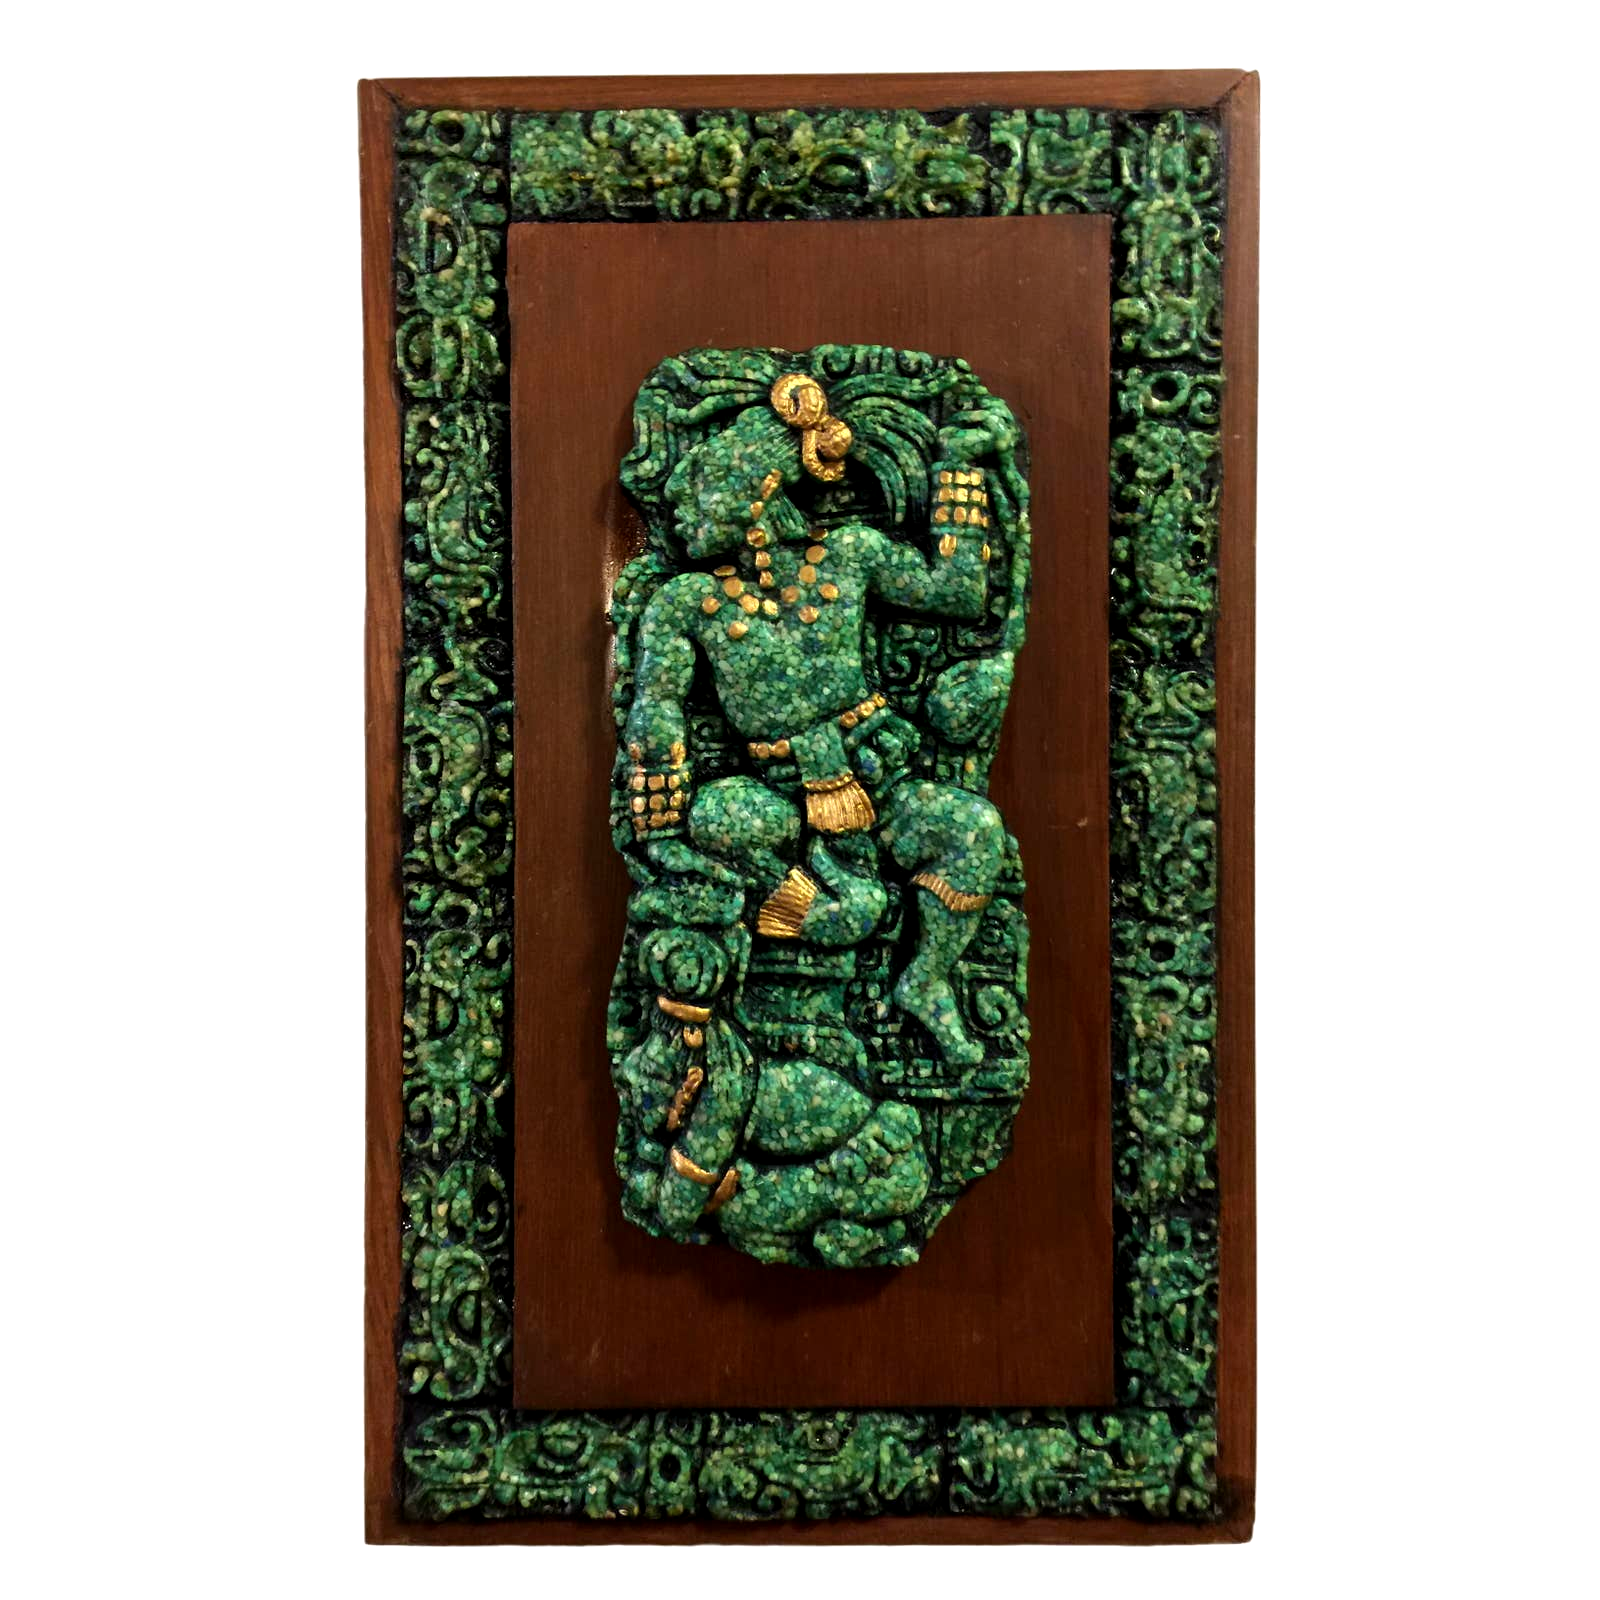 Primary image for VTG Zarebski Aztec Mayan Style Colored Stone Resin Wood Relief Plaque Wall Art